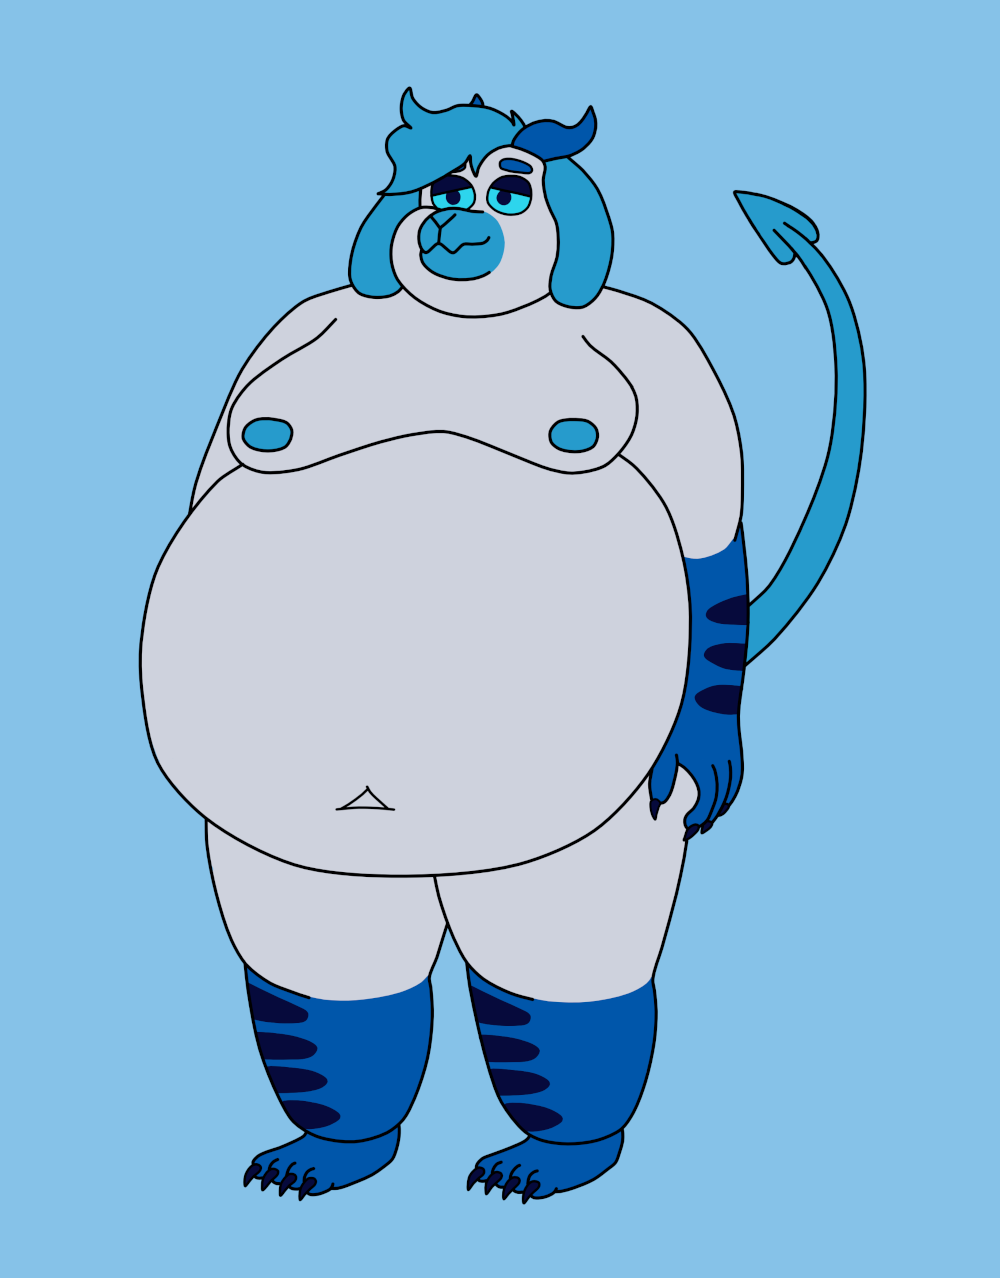 Front view of a very fat goat guy. He has short blue hair and a greyish-white coat. His ears are floppy.